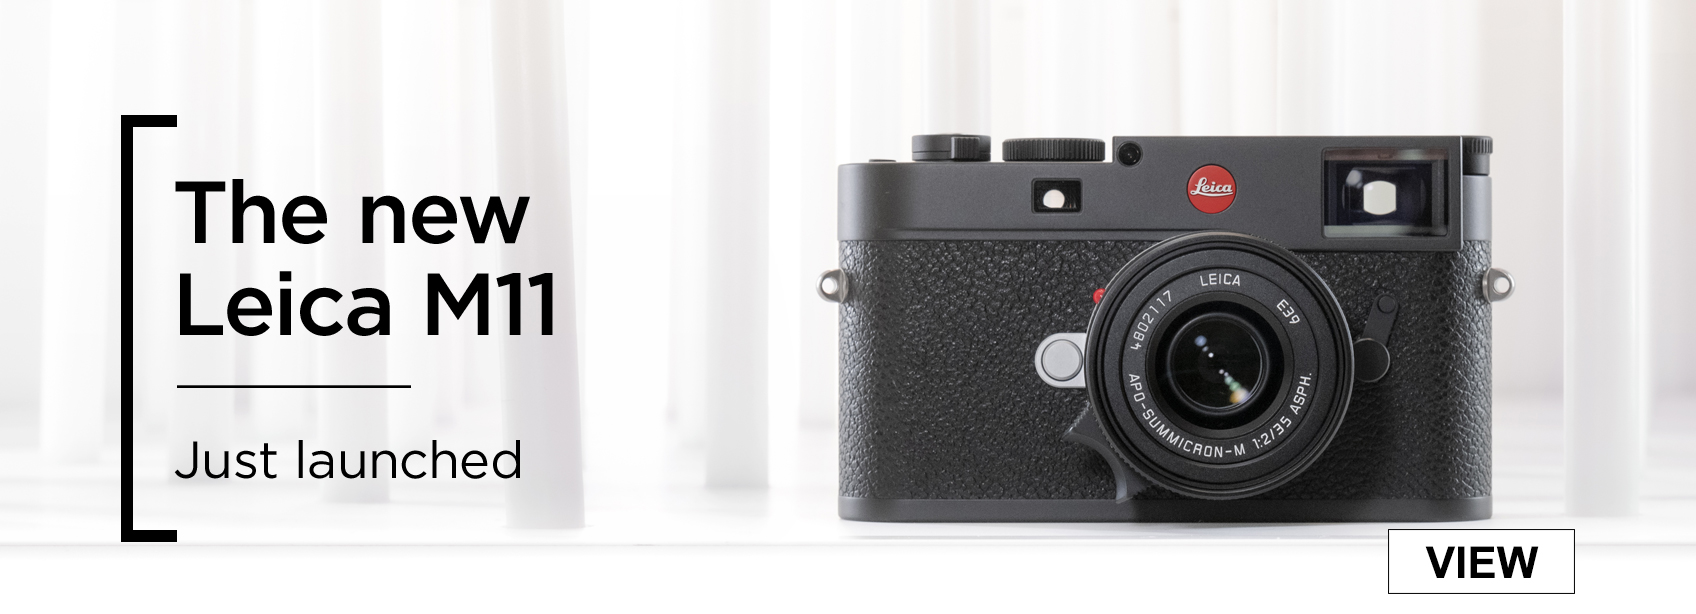 The new Leica M11 - Just launched